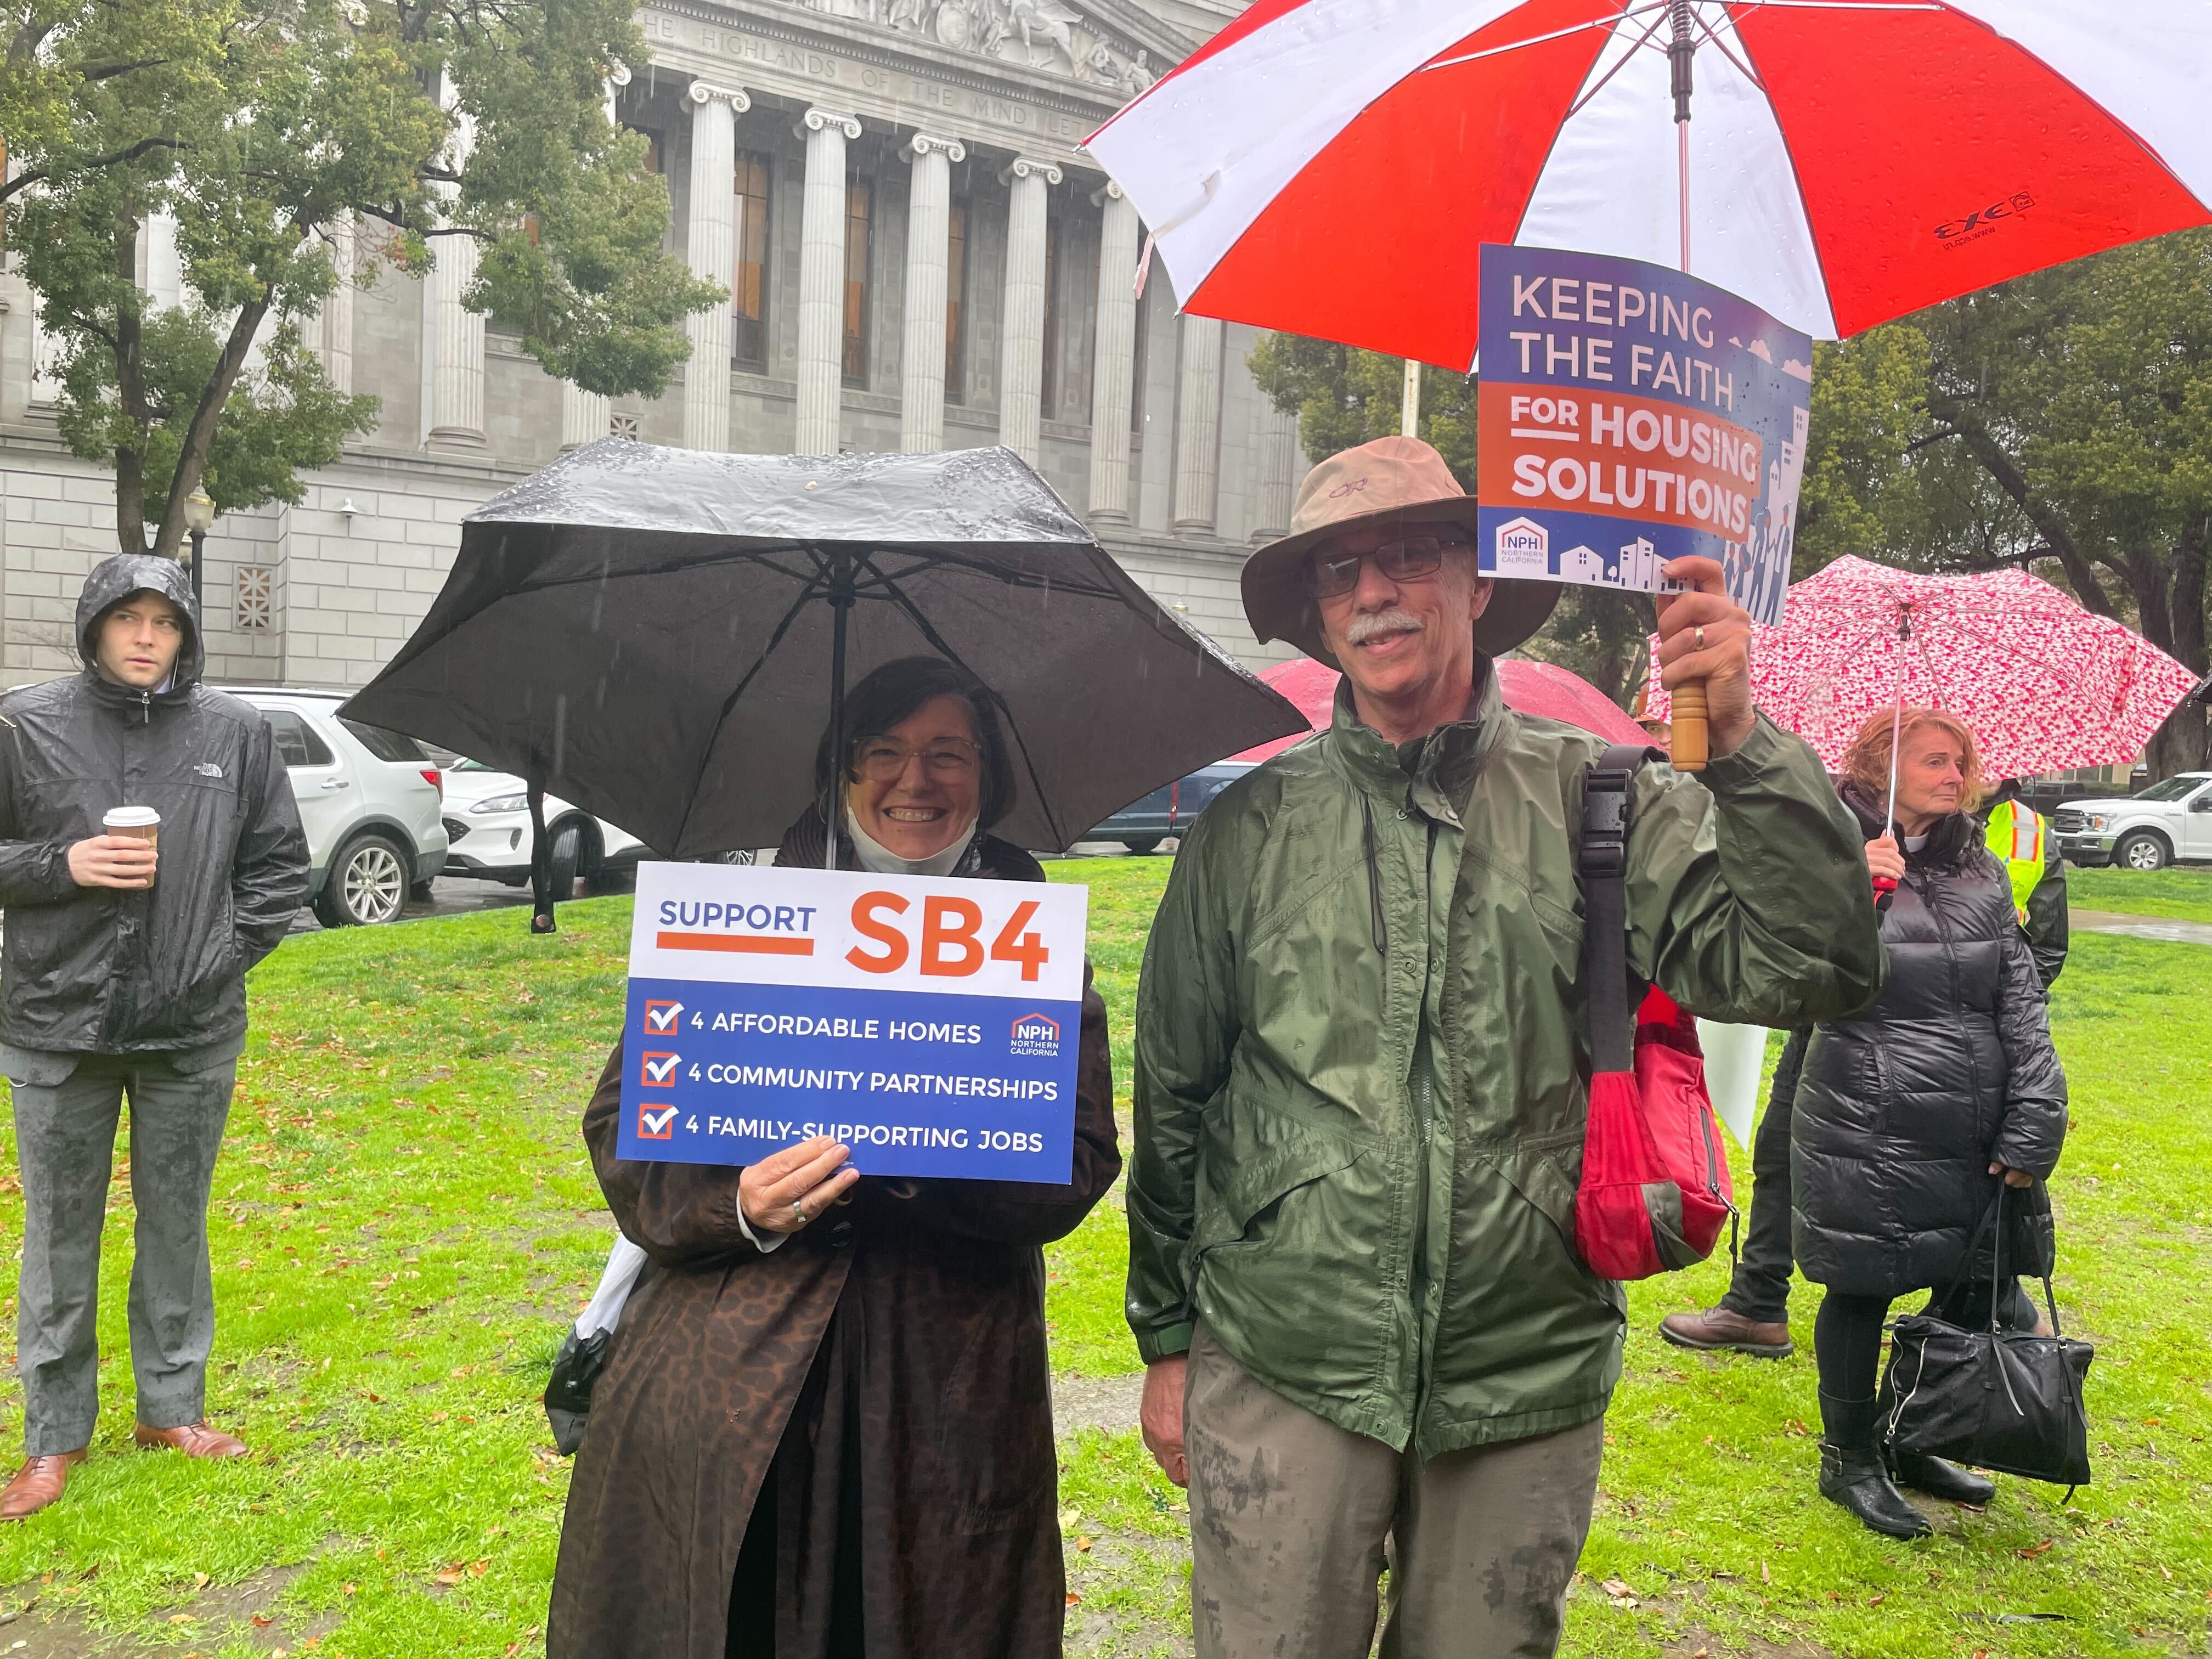 Two people holding an SB4 sign